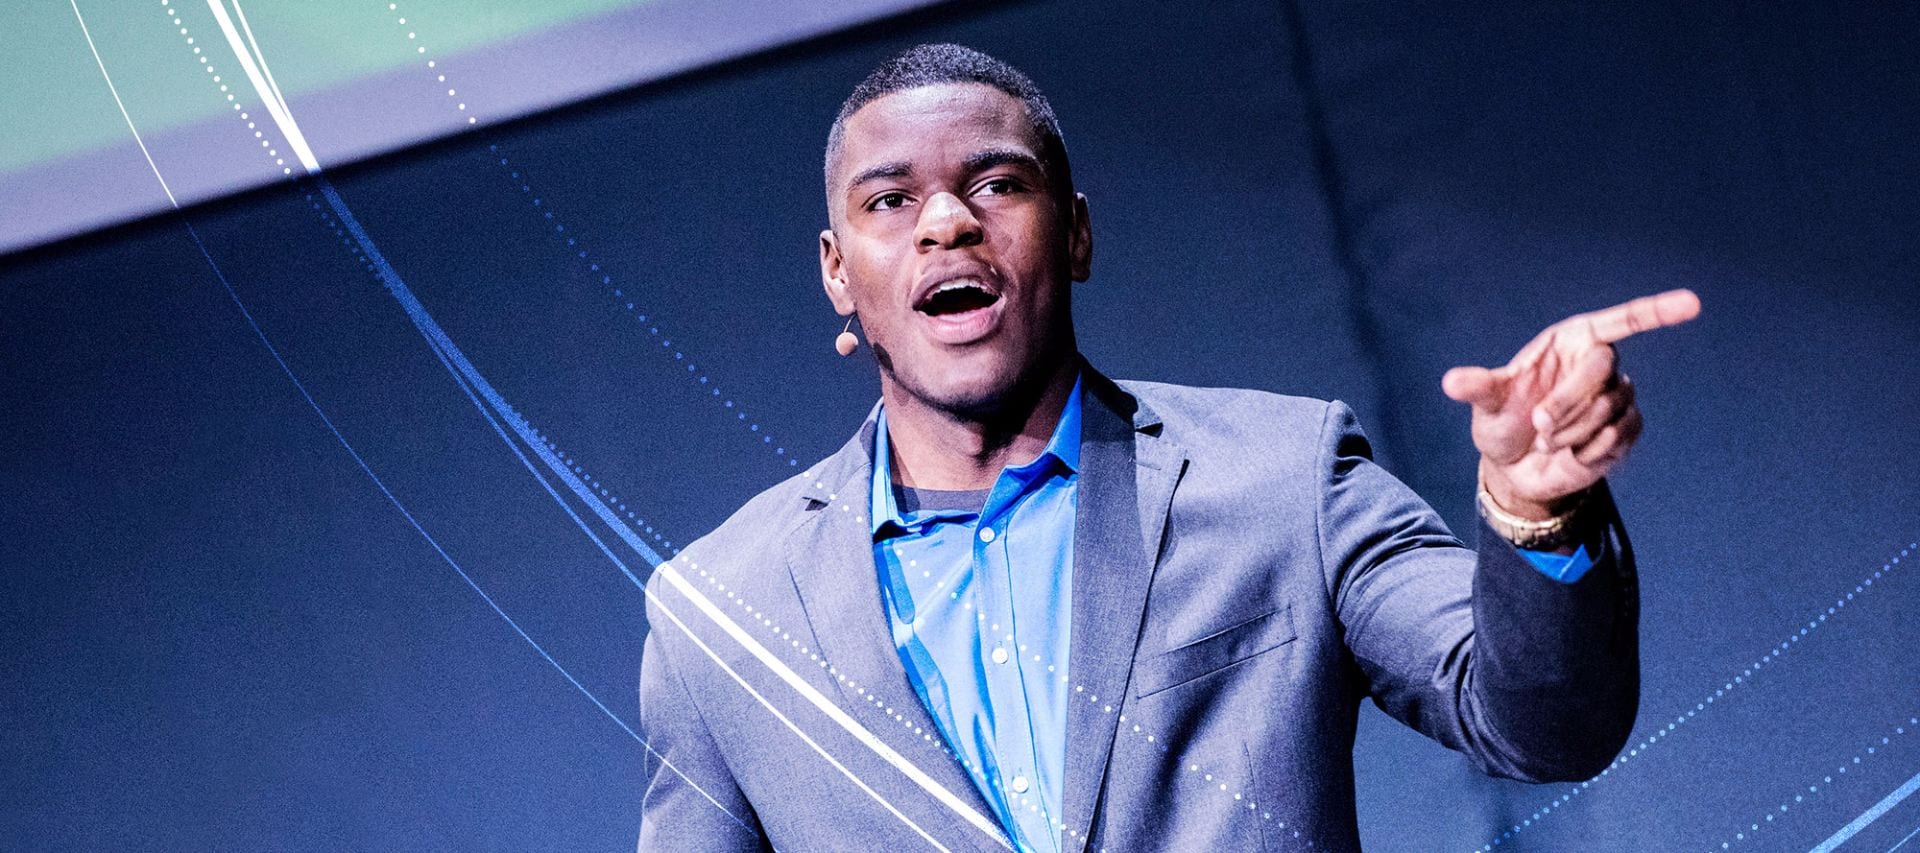 Penn State student, Jonathan Adrien, speaking on stage during Penn State’s Evening of Discovery event.